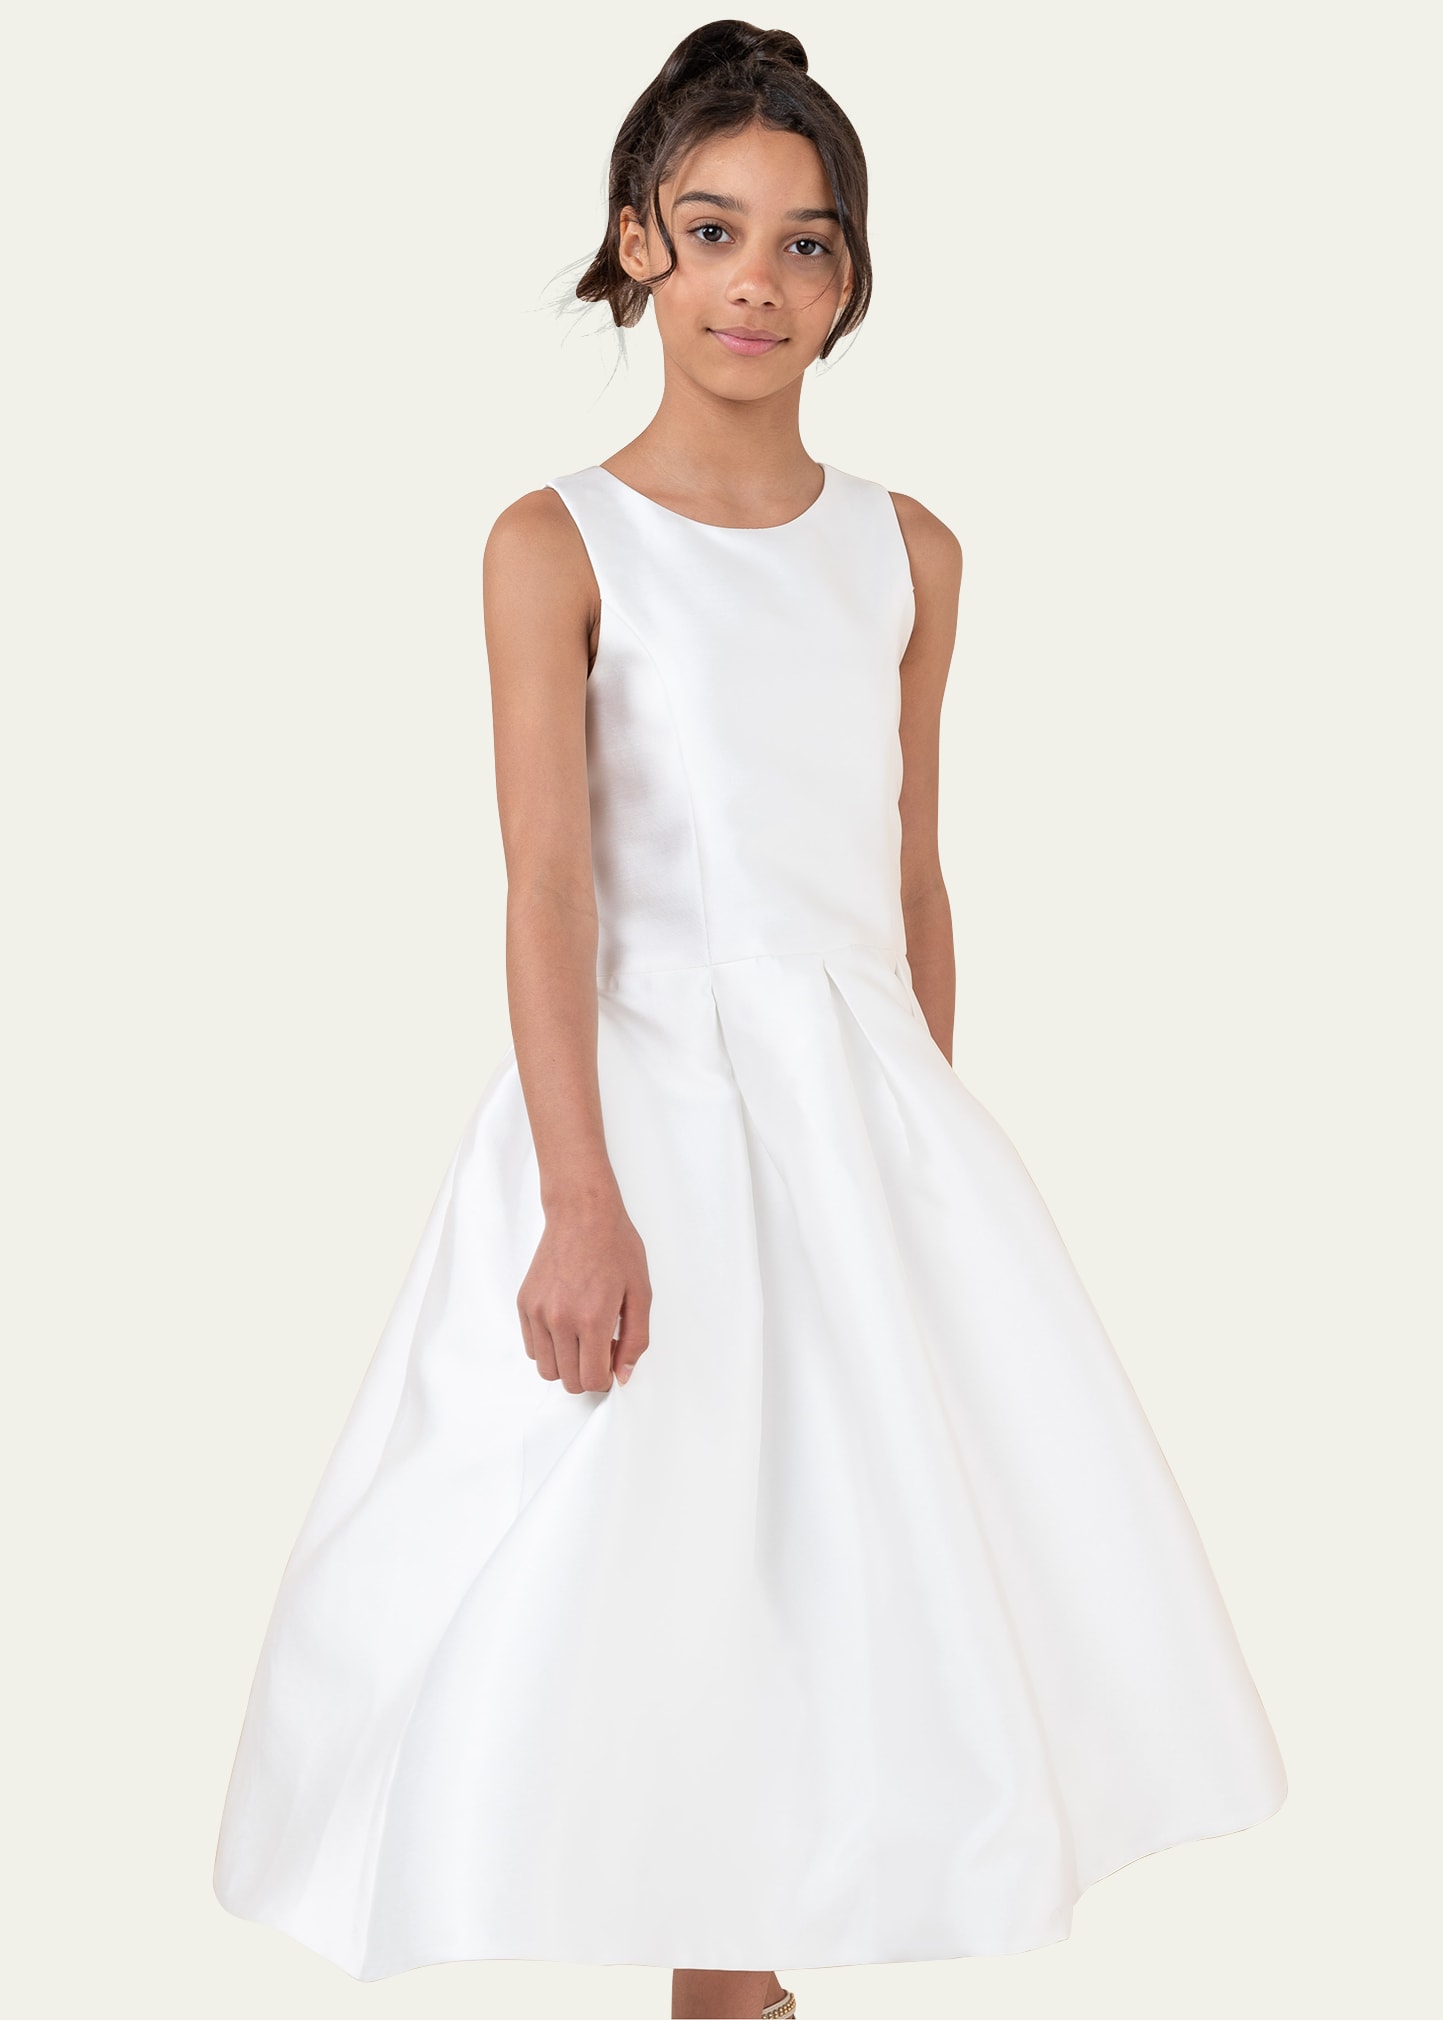 White Label By Zoe Kids' Girl's Jackie Bow Dress In White